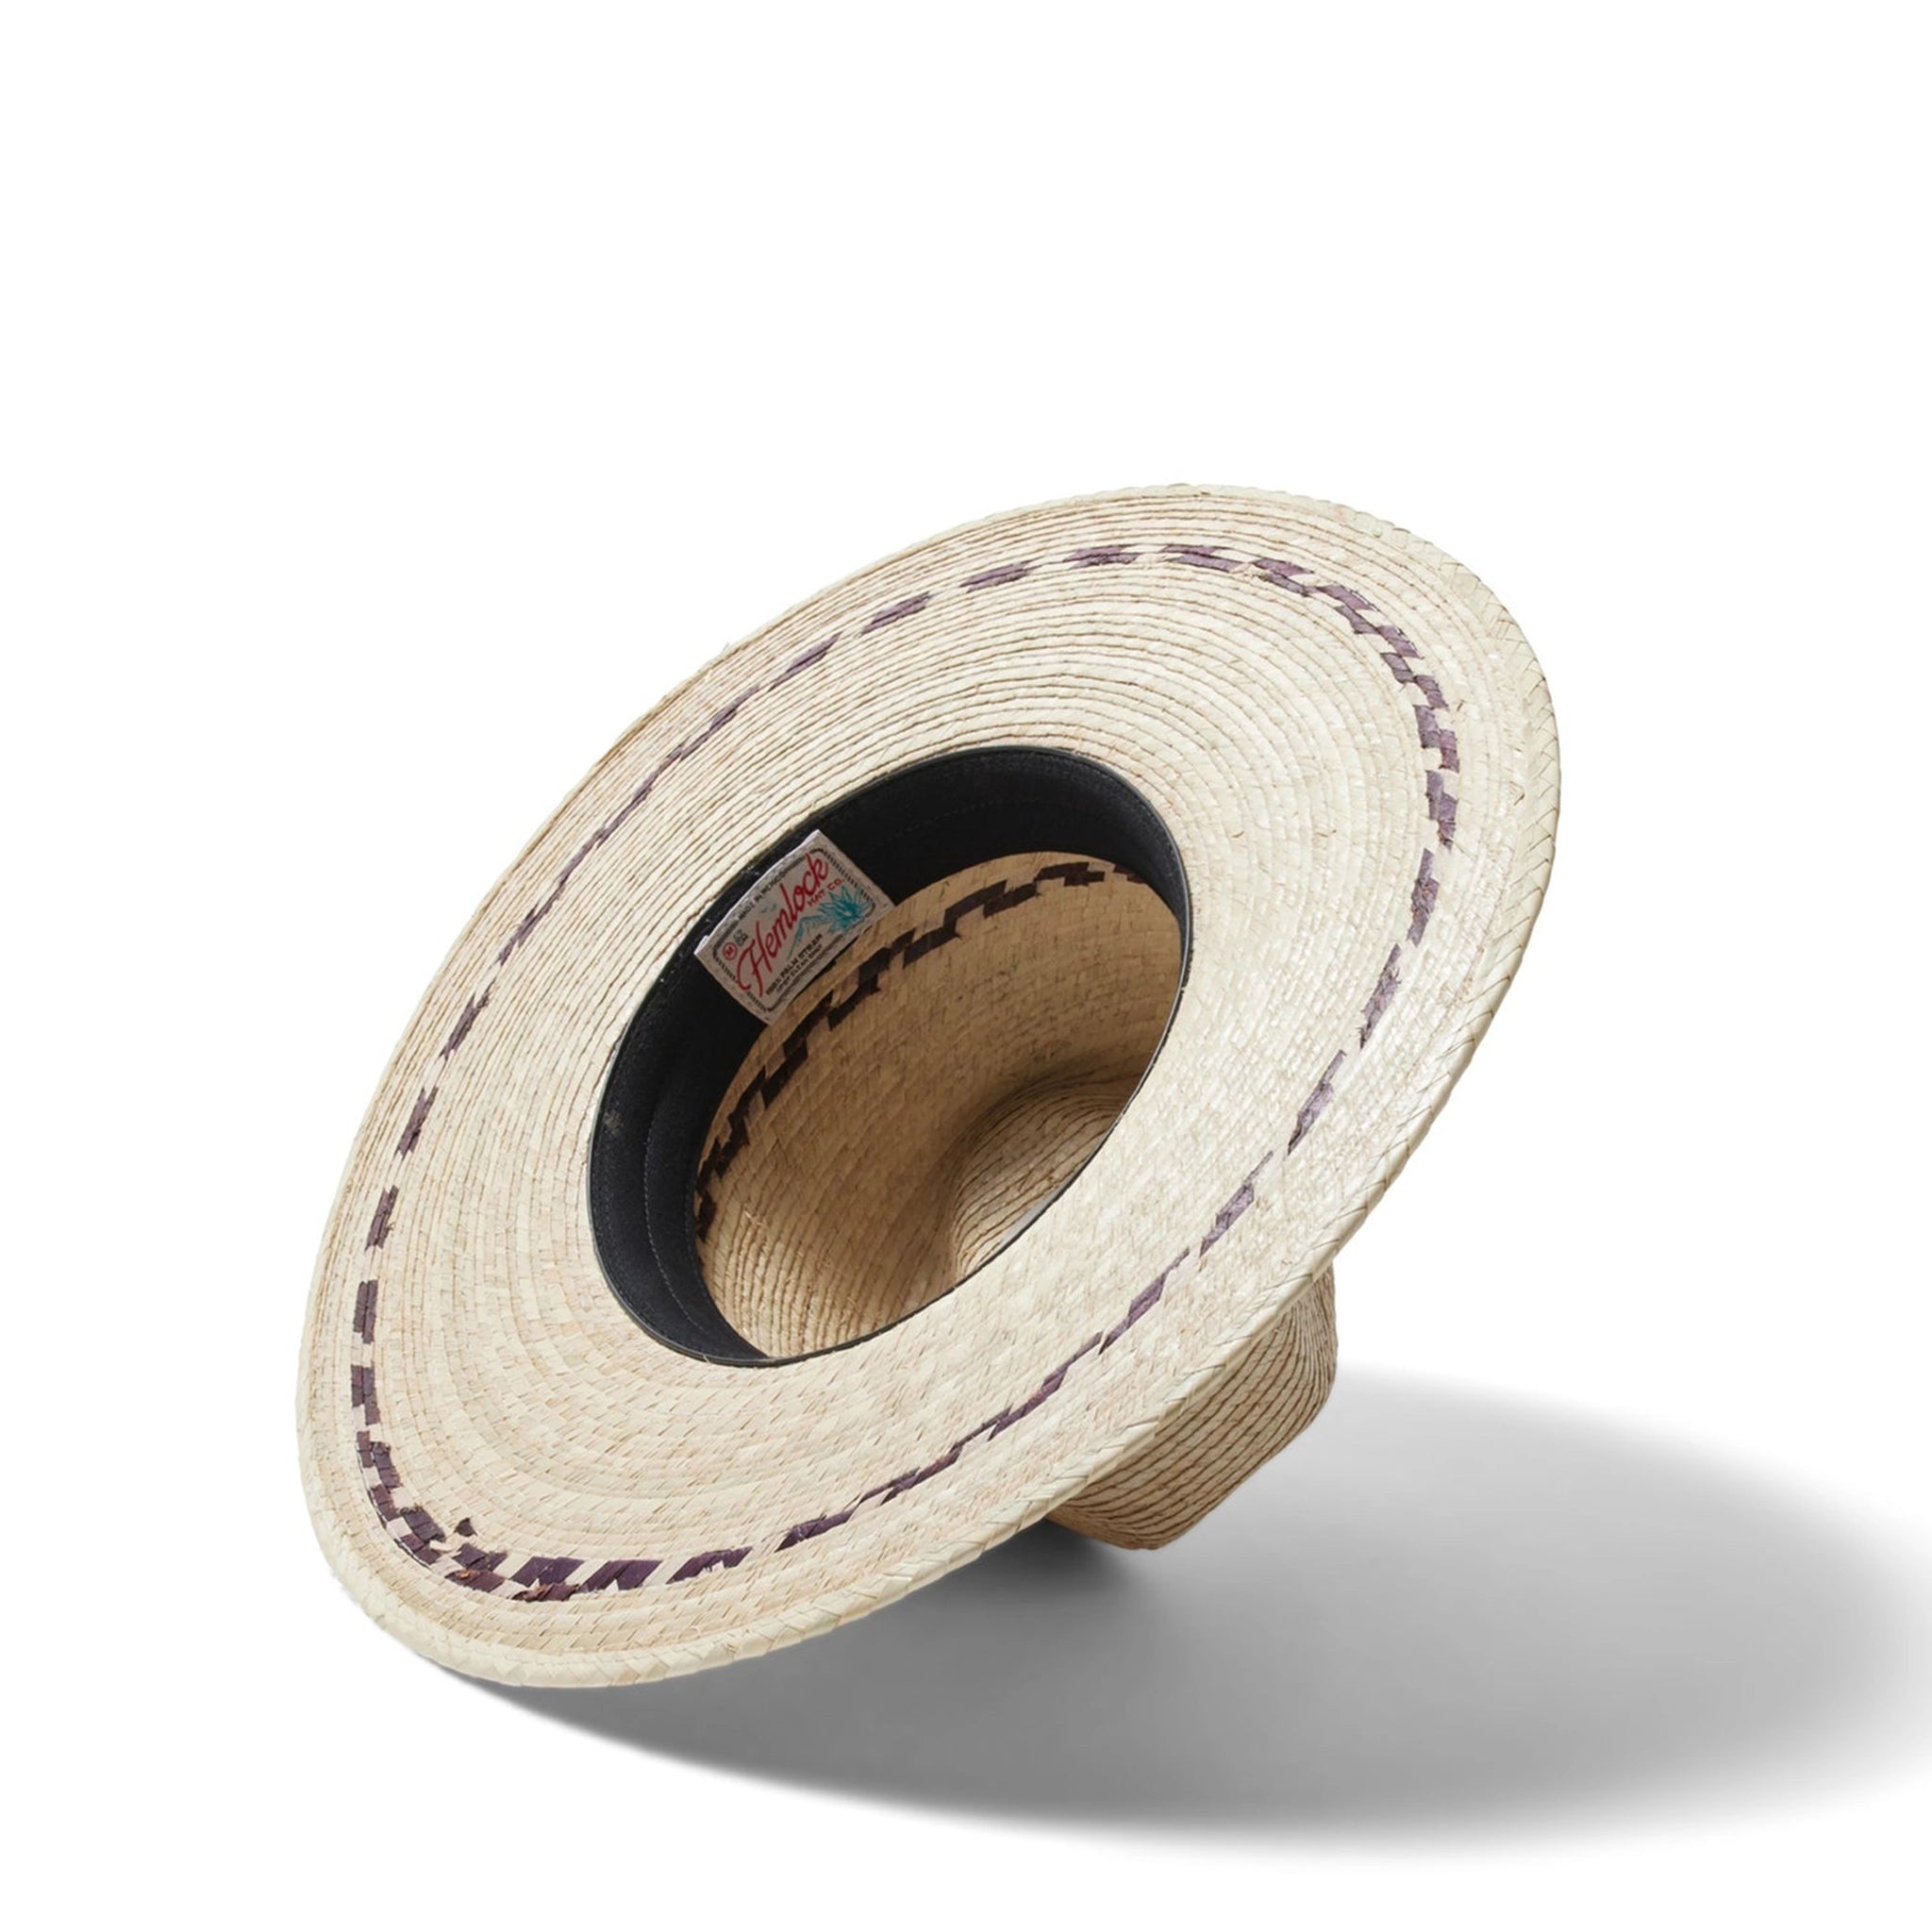 On a neutral background is a tan woven sun hat with a wide brim and brown stitching details around the bottom of the brim as well as around the base of the hat.